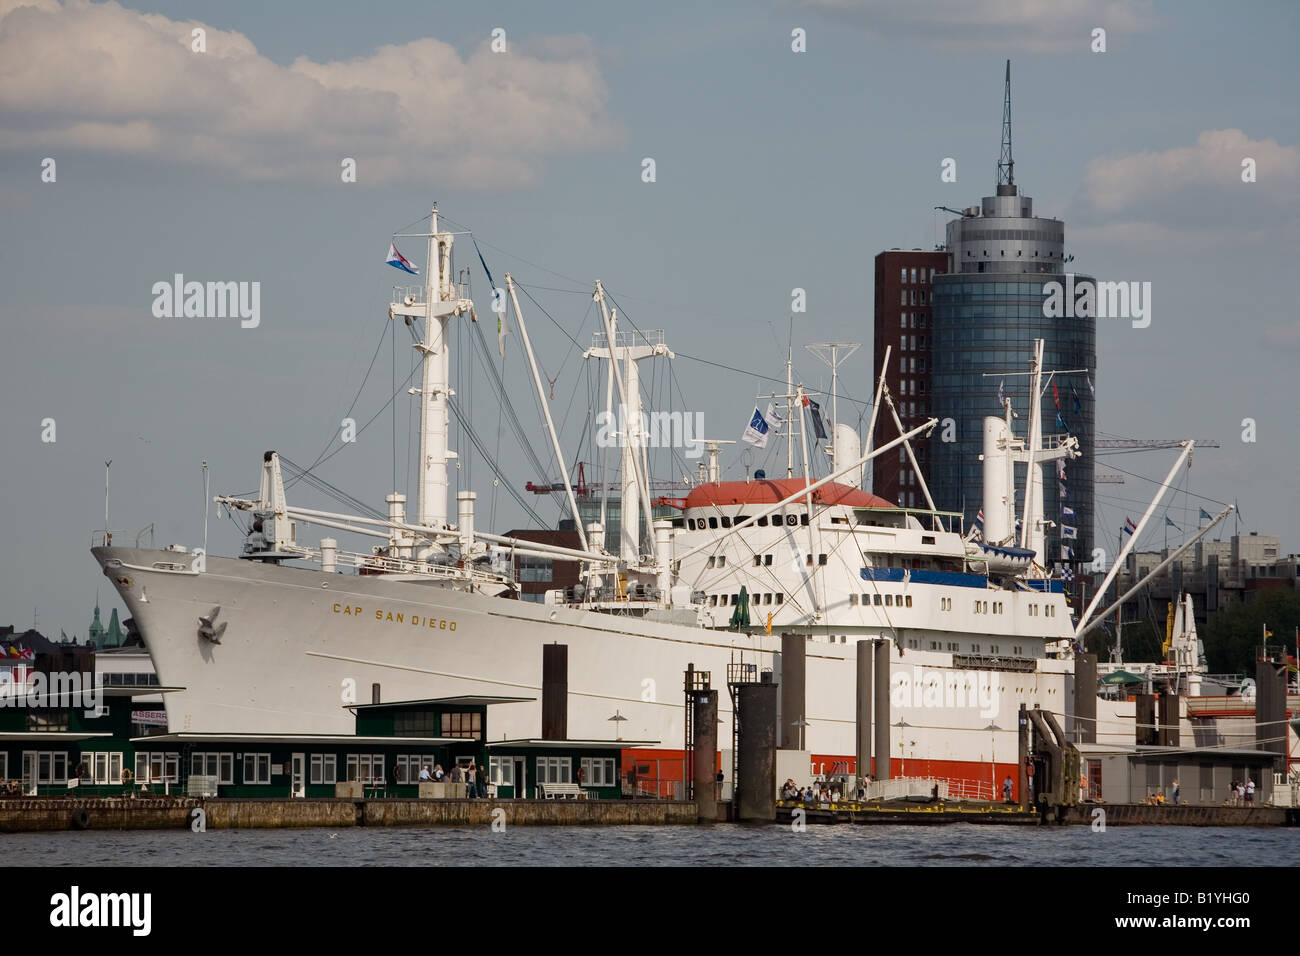 The museum freighter Cap San Diego in front of the tower of the Hanseatic Trade Center in the port of Hamburg Stock Photo